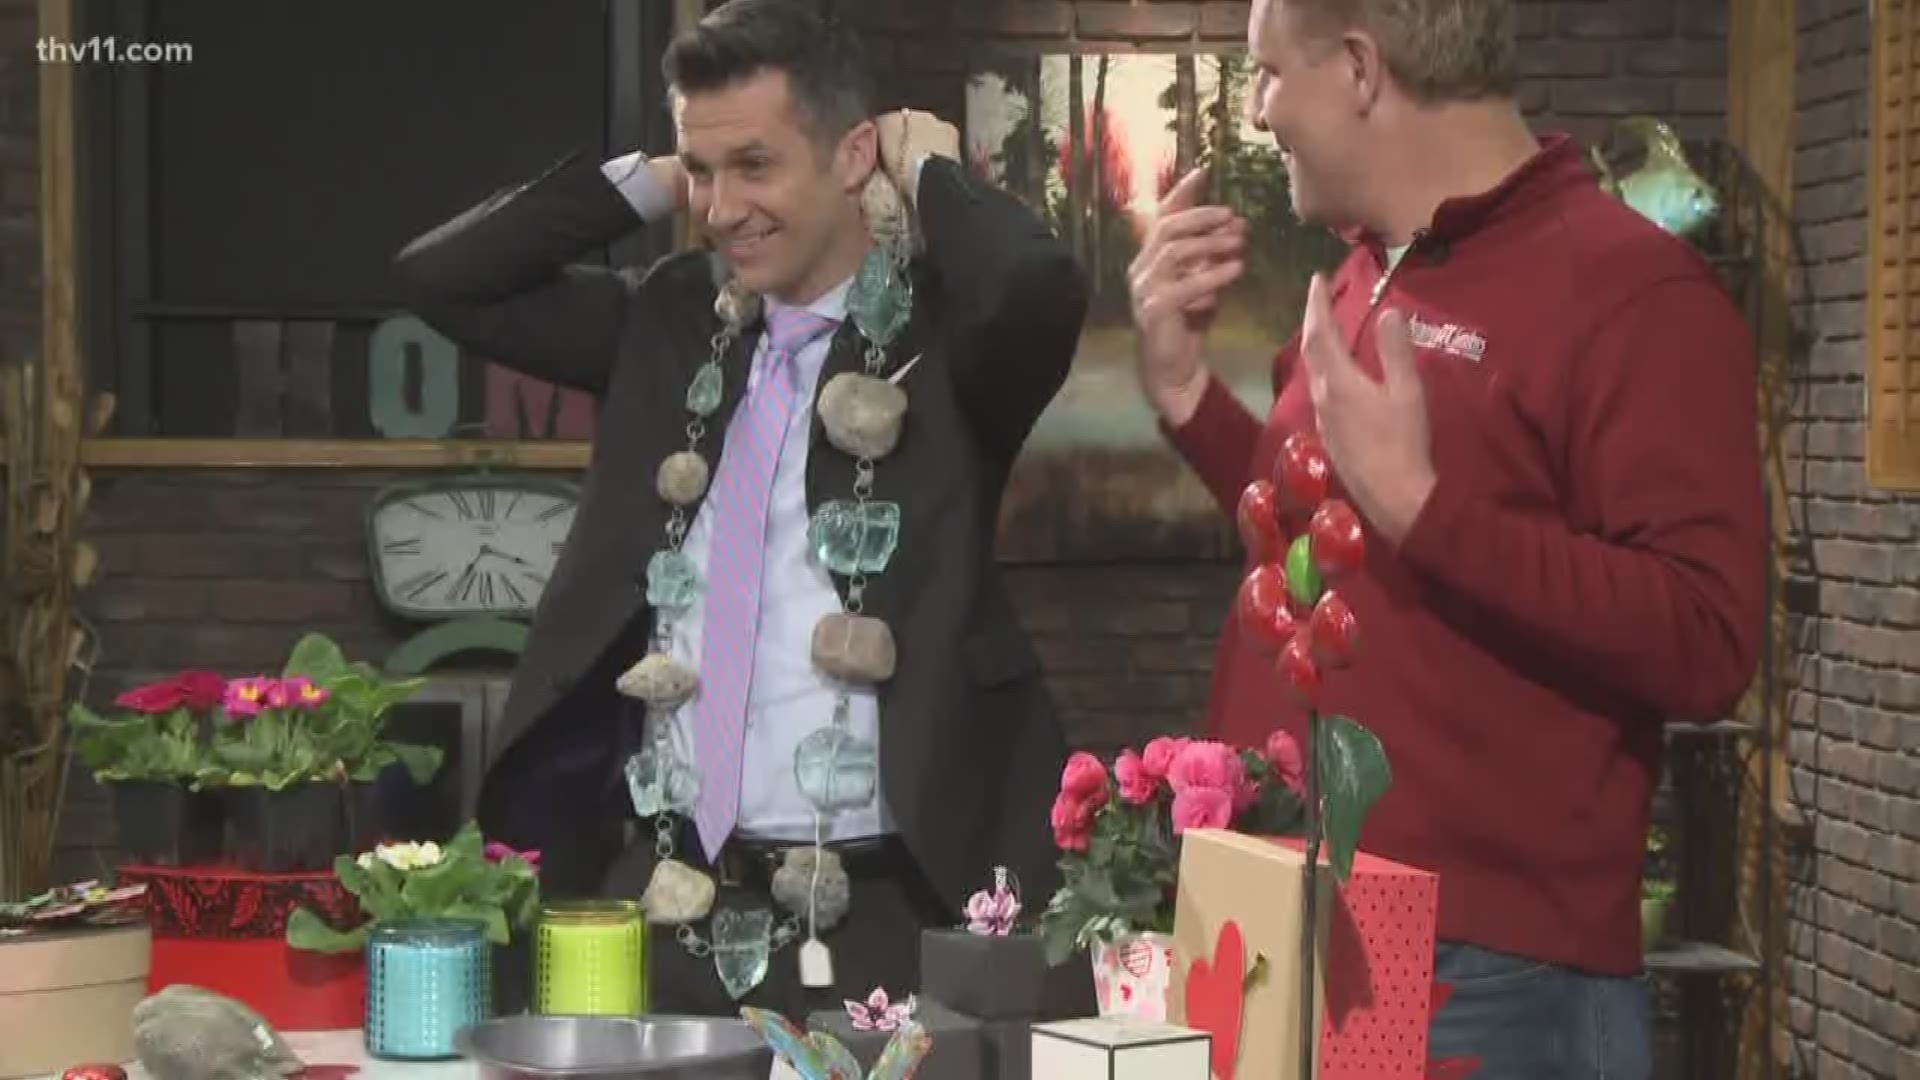 Sometimes the holidays just sneak up on us, including Valentine's Day. Chris H. Olsen joined THV11 This Morning to show us some last minute gifts